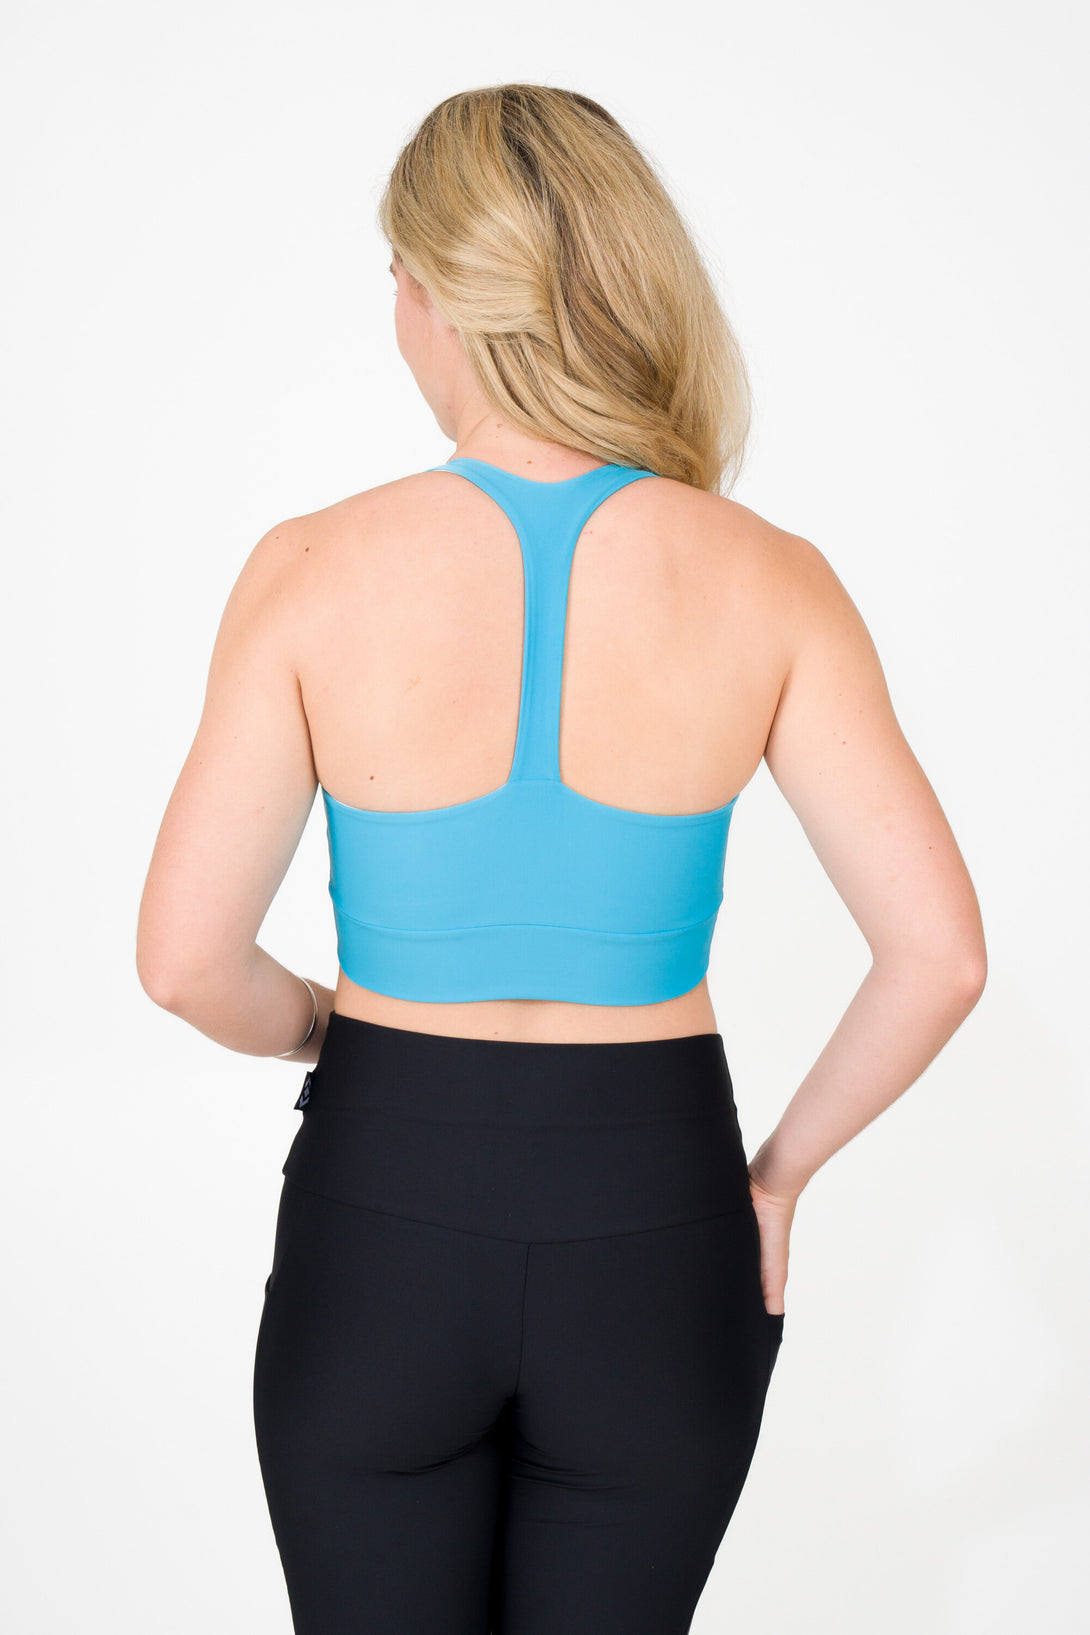 blonde woman wearing aqua cross over crop top activewear for gym and fitness